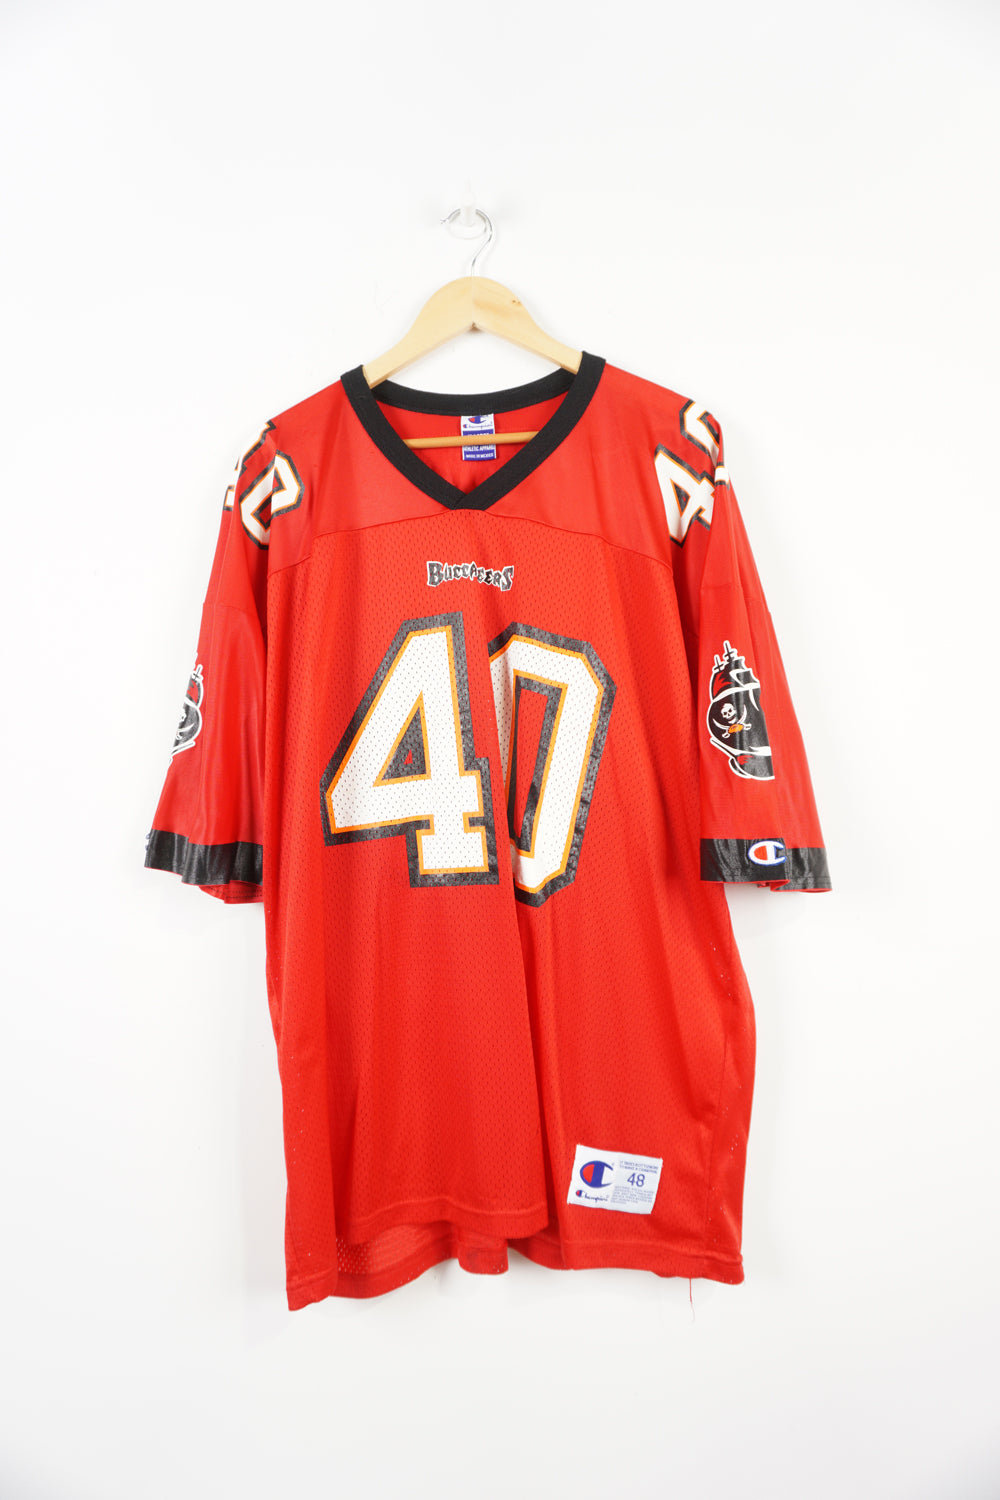 tampa bay old jersey